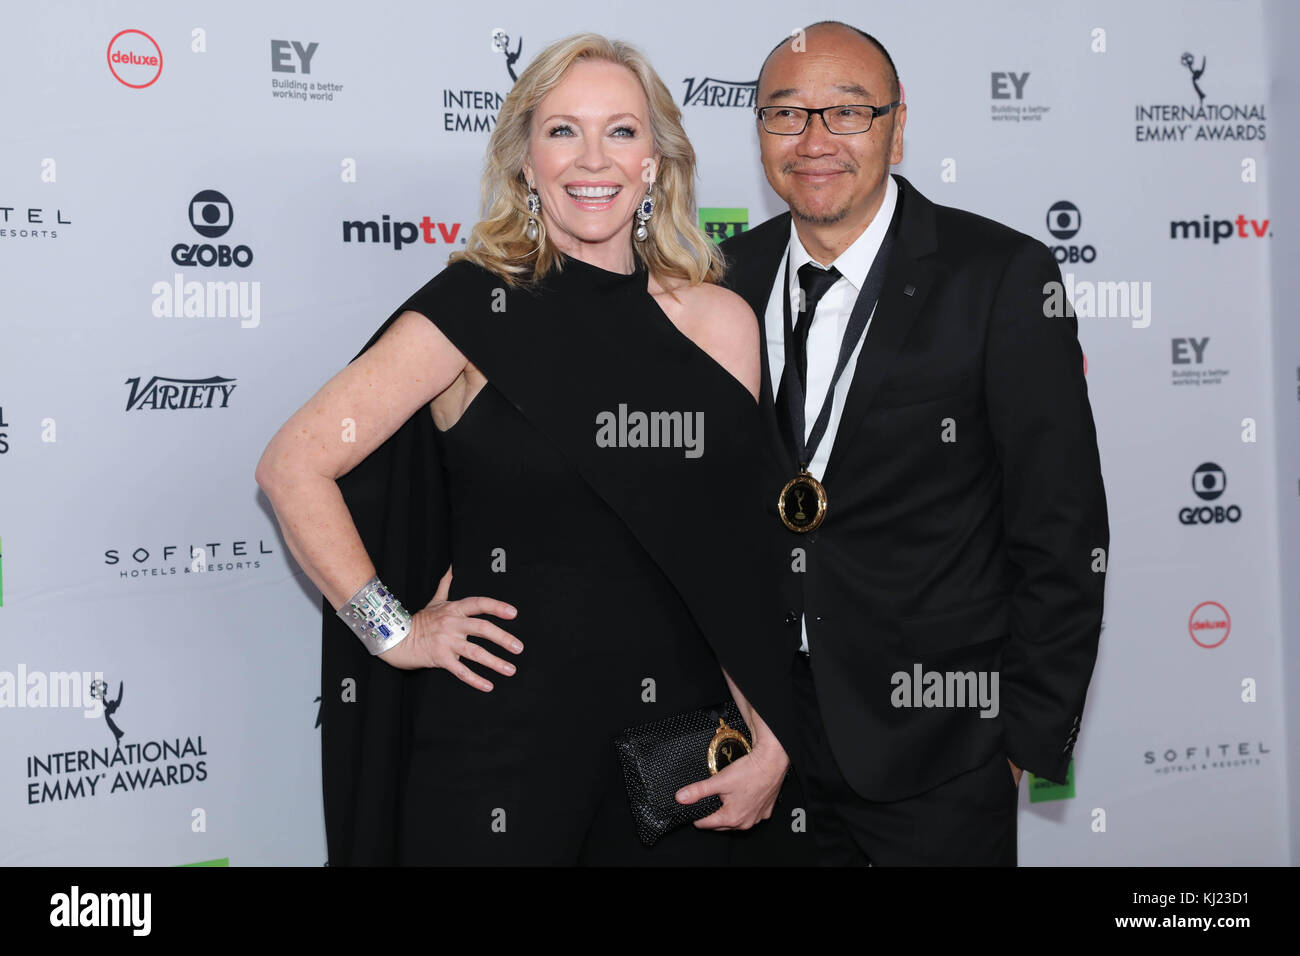 New York, USA. 20th November, 2017. Rebecca Gibney and Tony Ayres during the 45th International Emmy awards gala in New York city on November 20, 2017. The International Emmy Award is an award ceremony bestowed by the International Academy of Television Arts and Sciences in recognition to the best television programs initially produced and aired outside the United States. (Photo: Vanessa Carvalho/Brazil Photo Press) Stock Photo